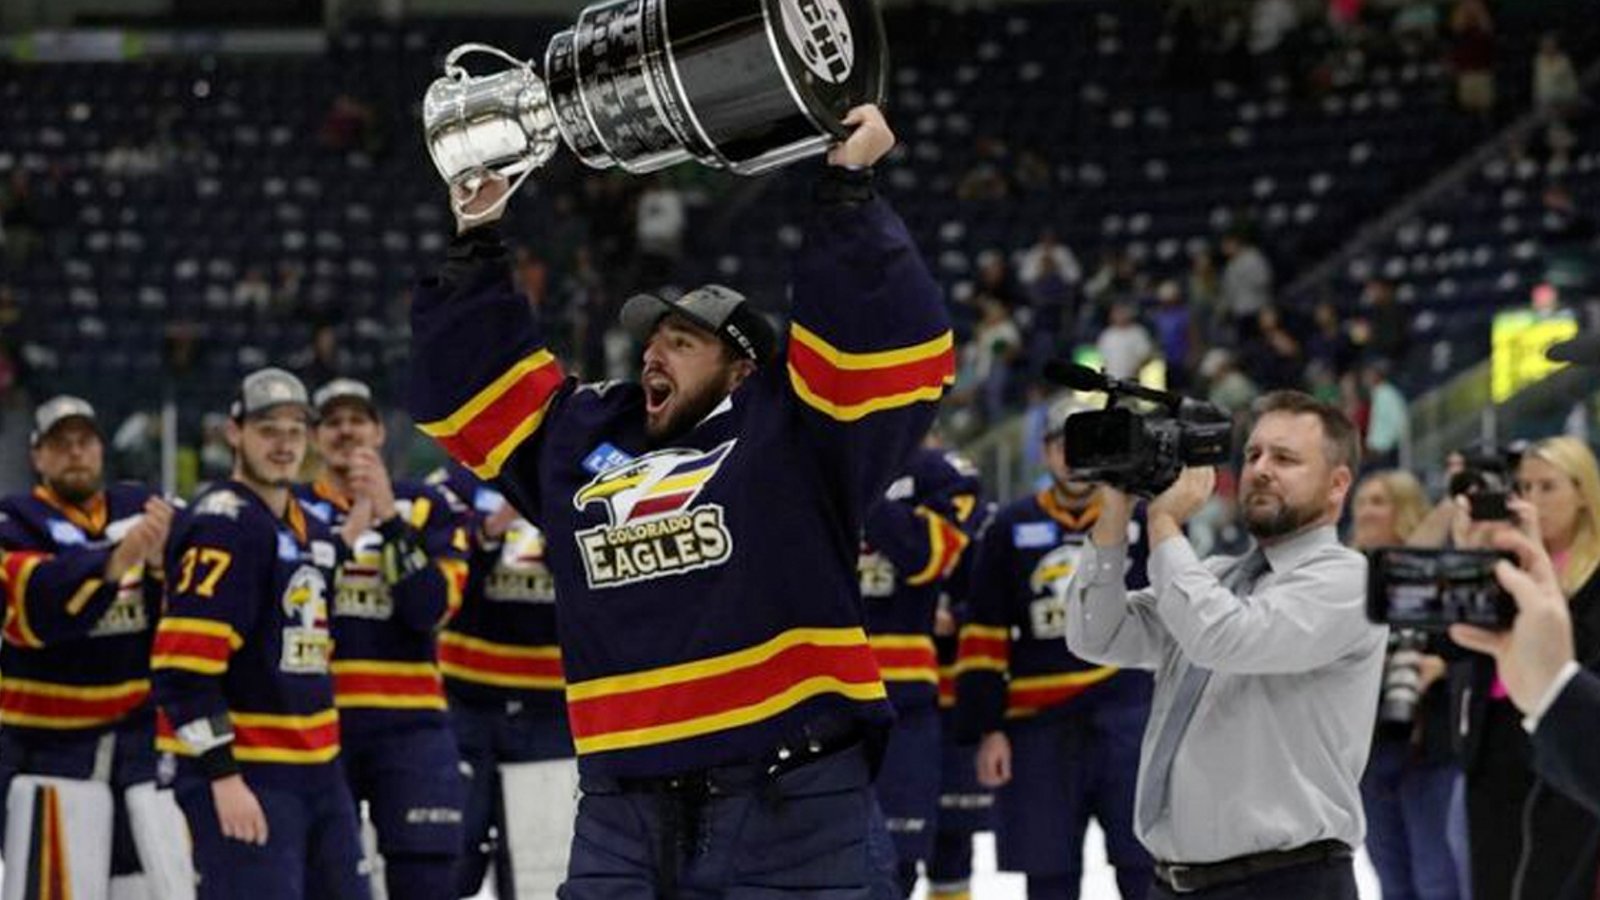 ECHL champions refuse to return the Cup!